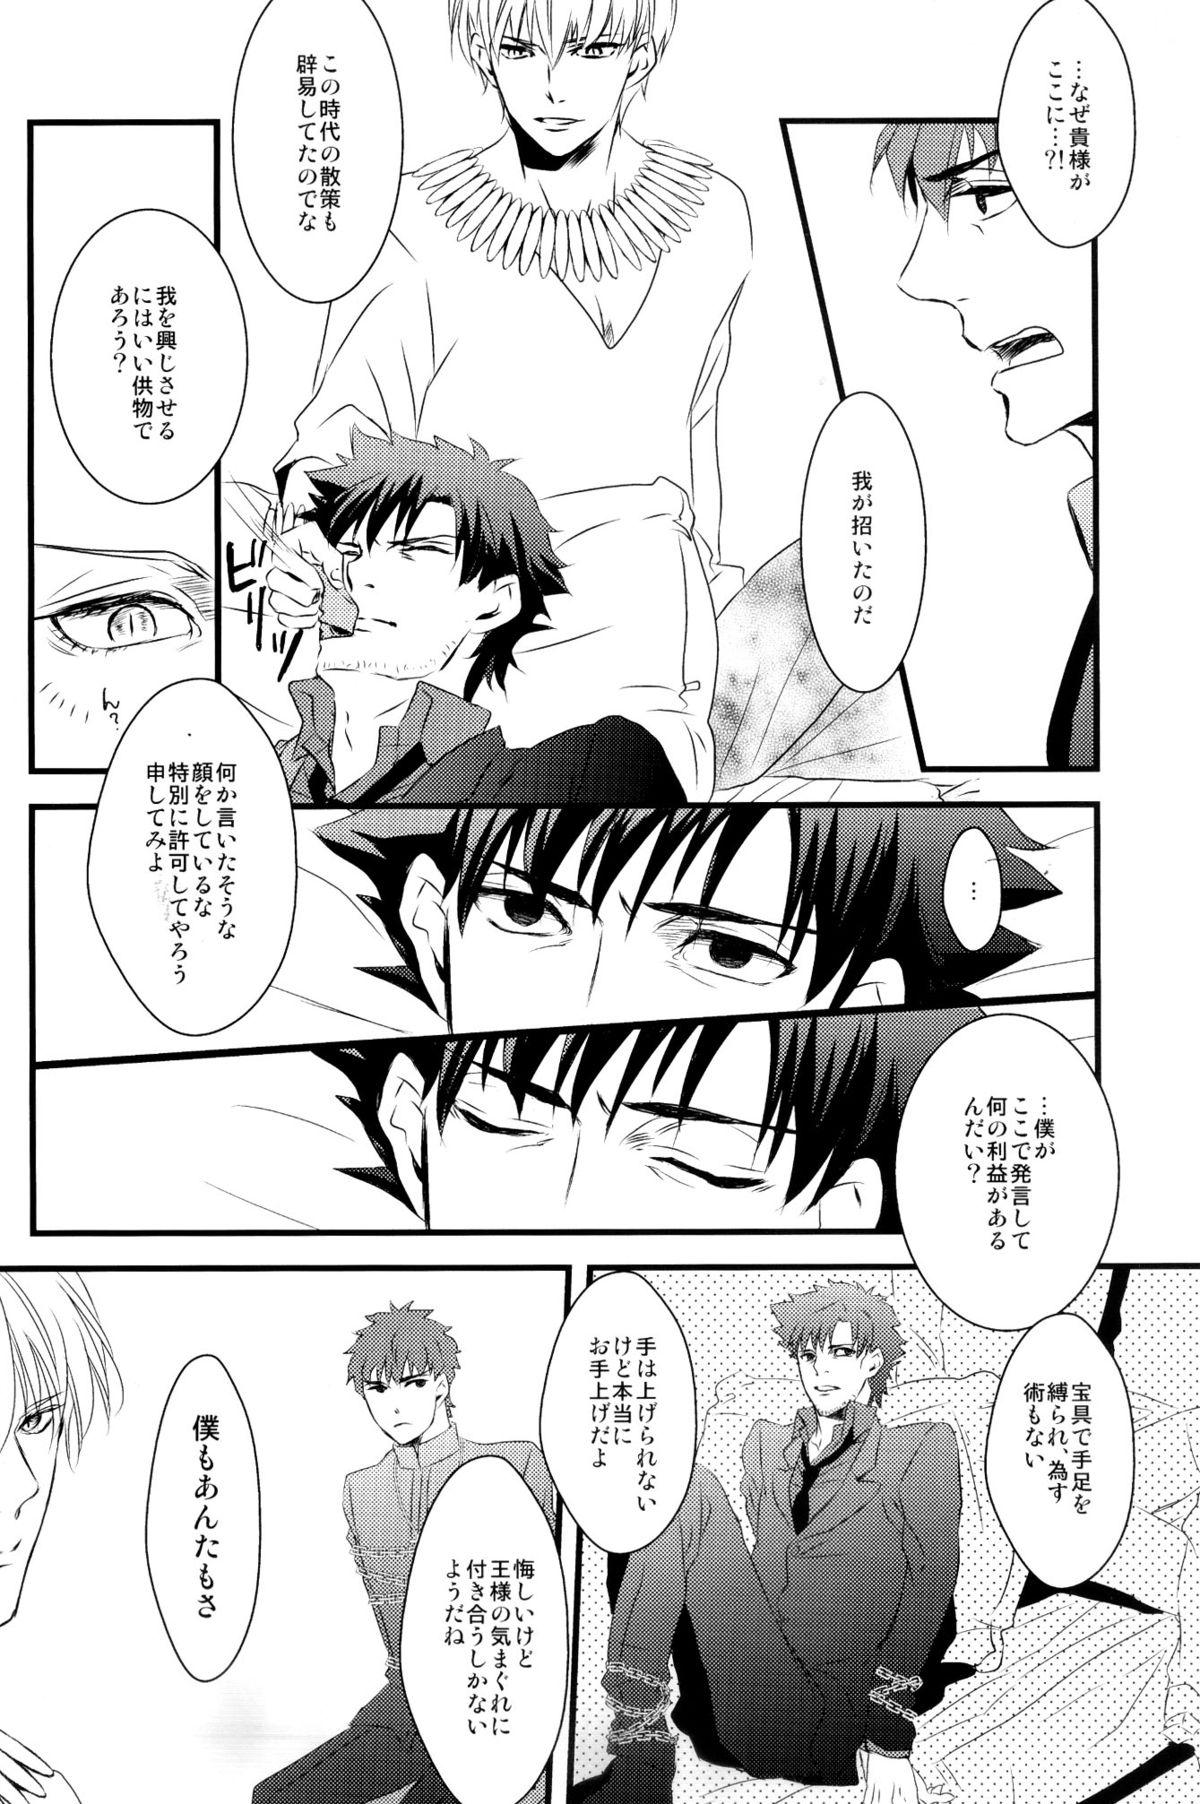 Gaysex Inside - Fate zero Ballbusting - Page 6